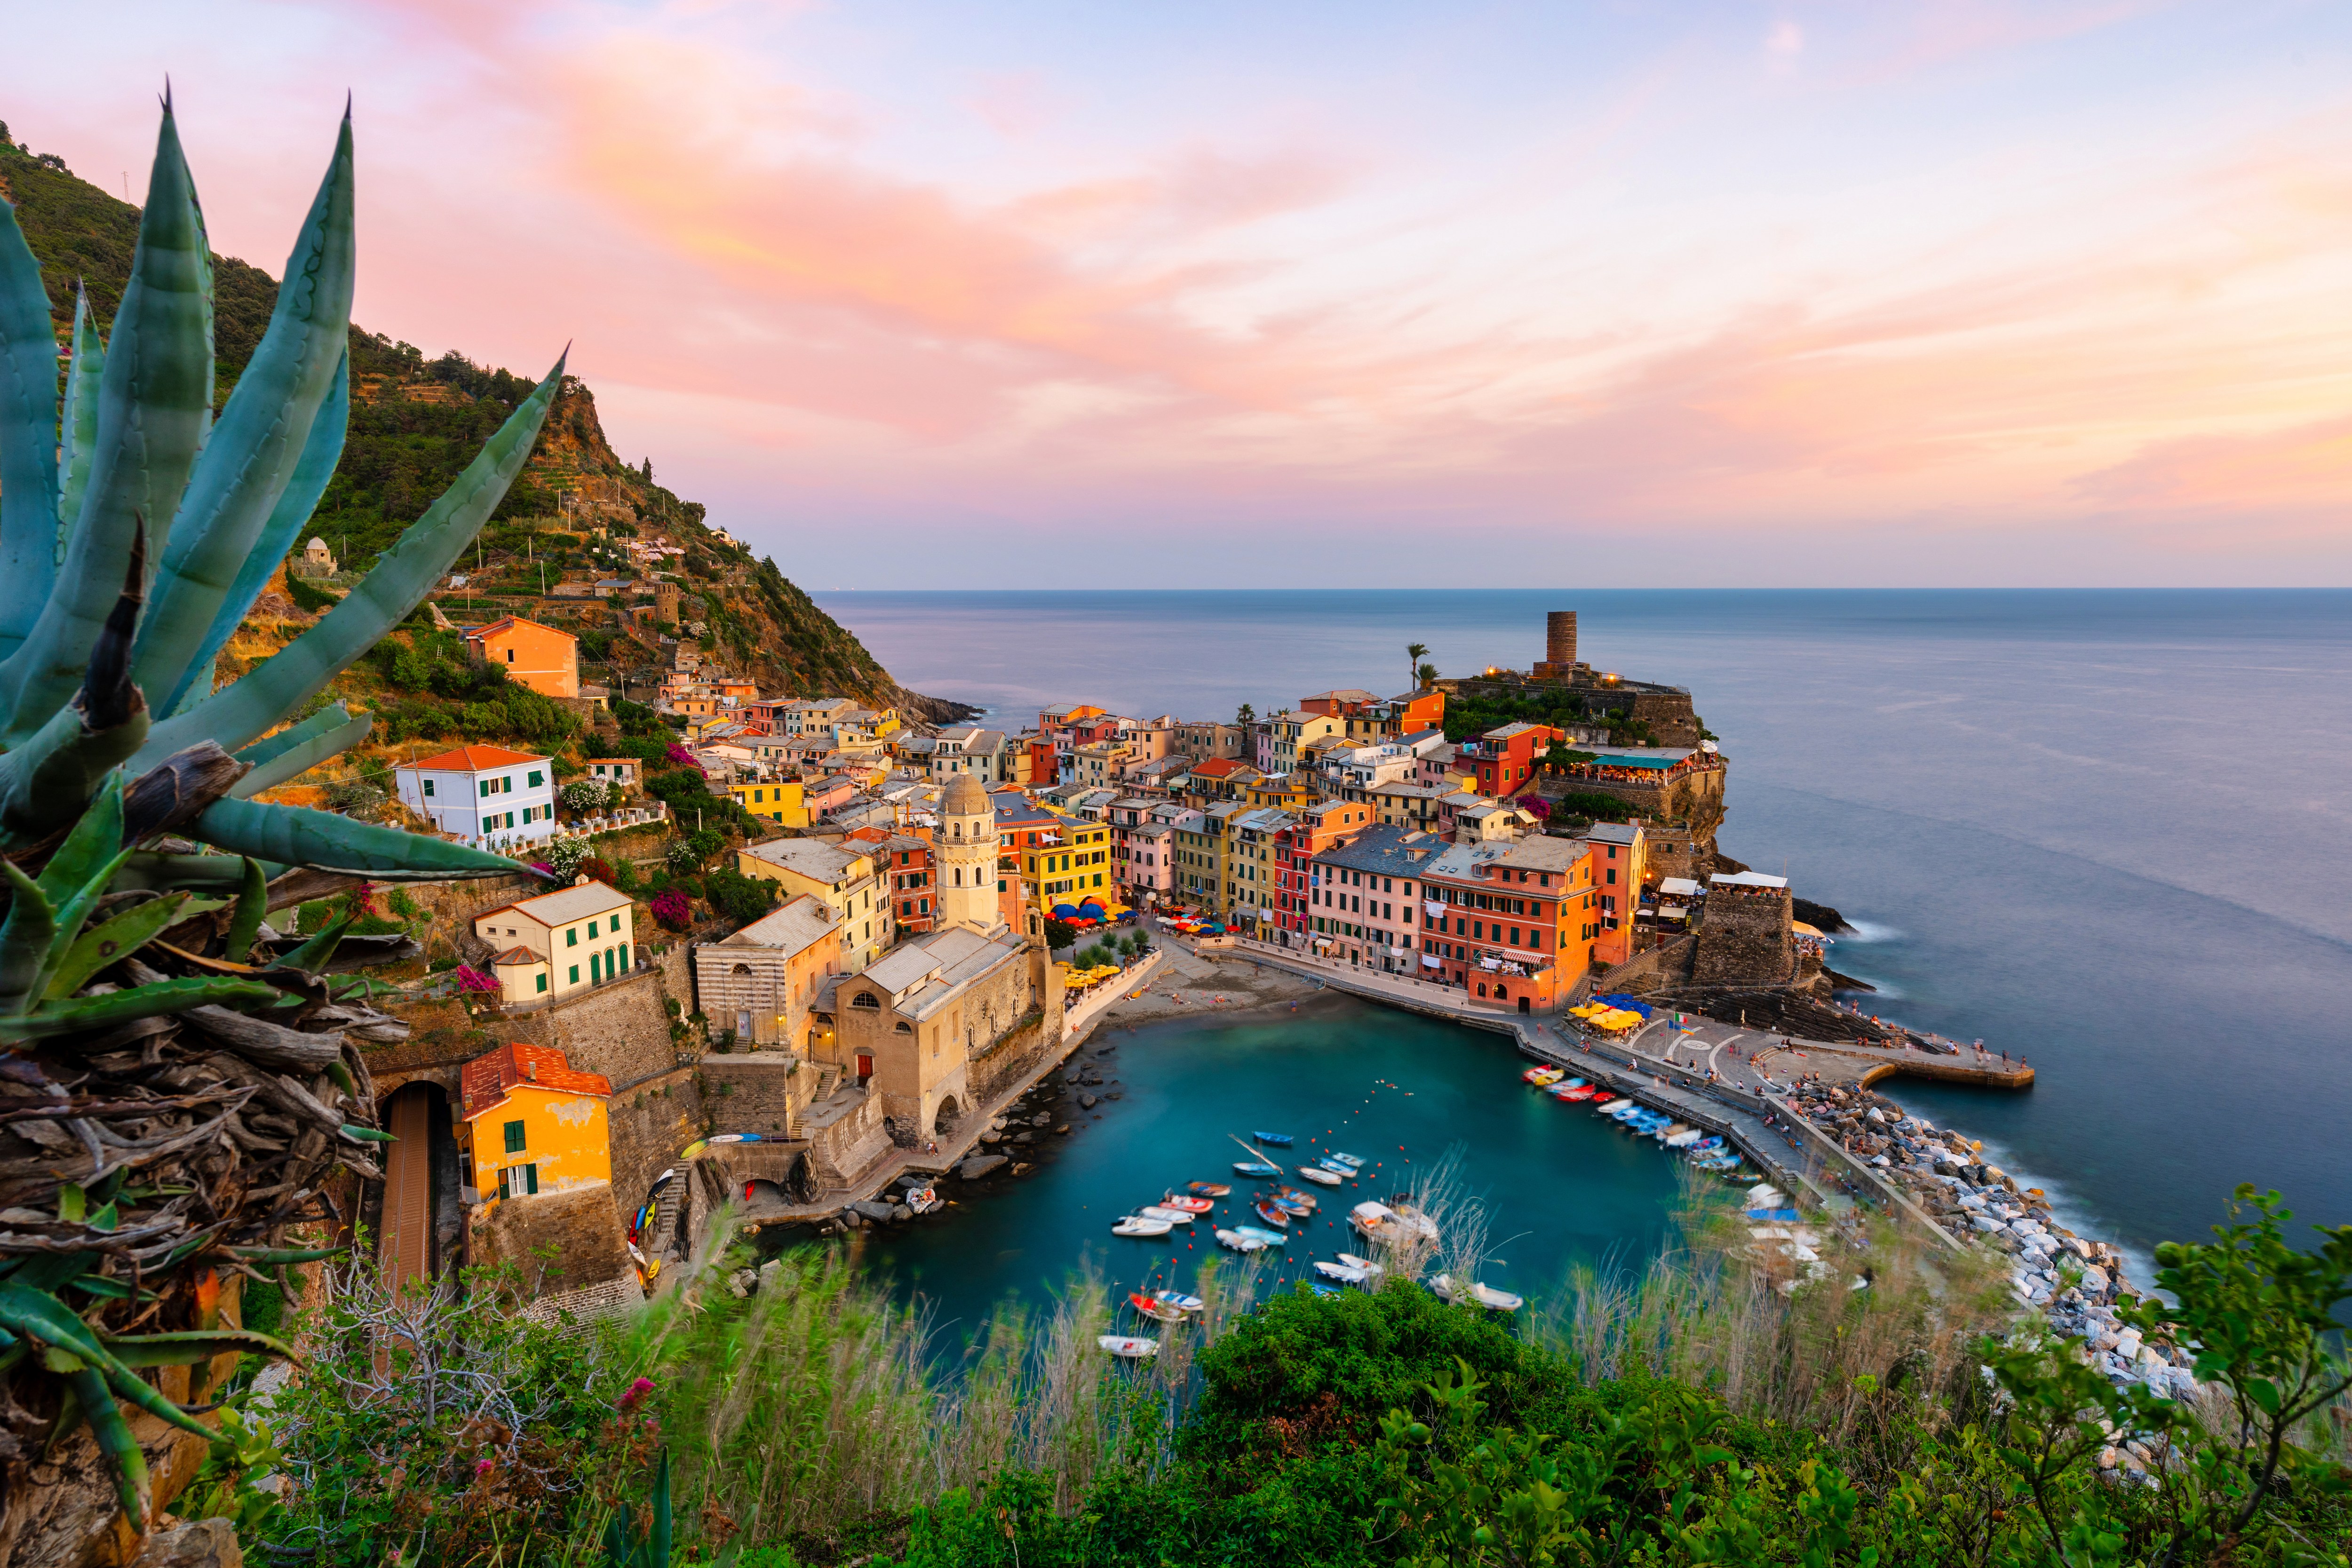 Vernazza in Liguria, northern Italy